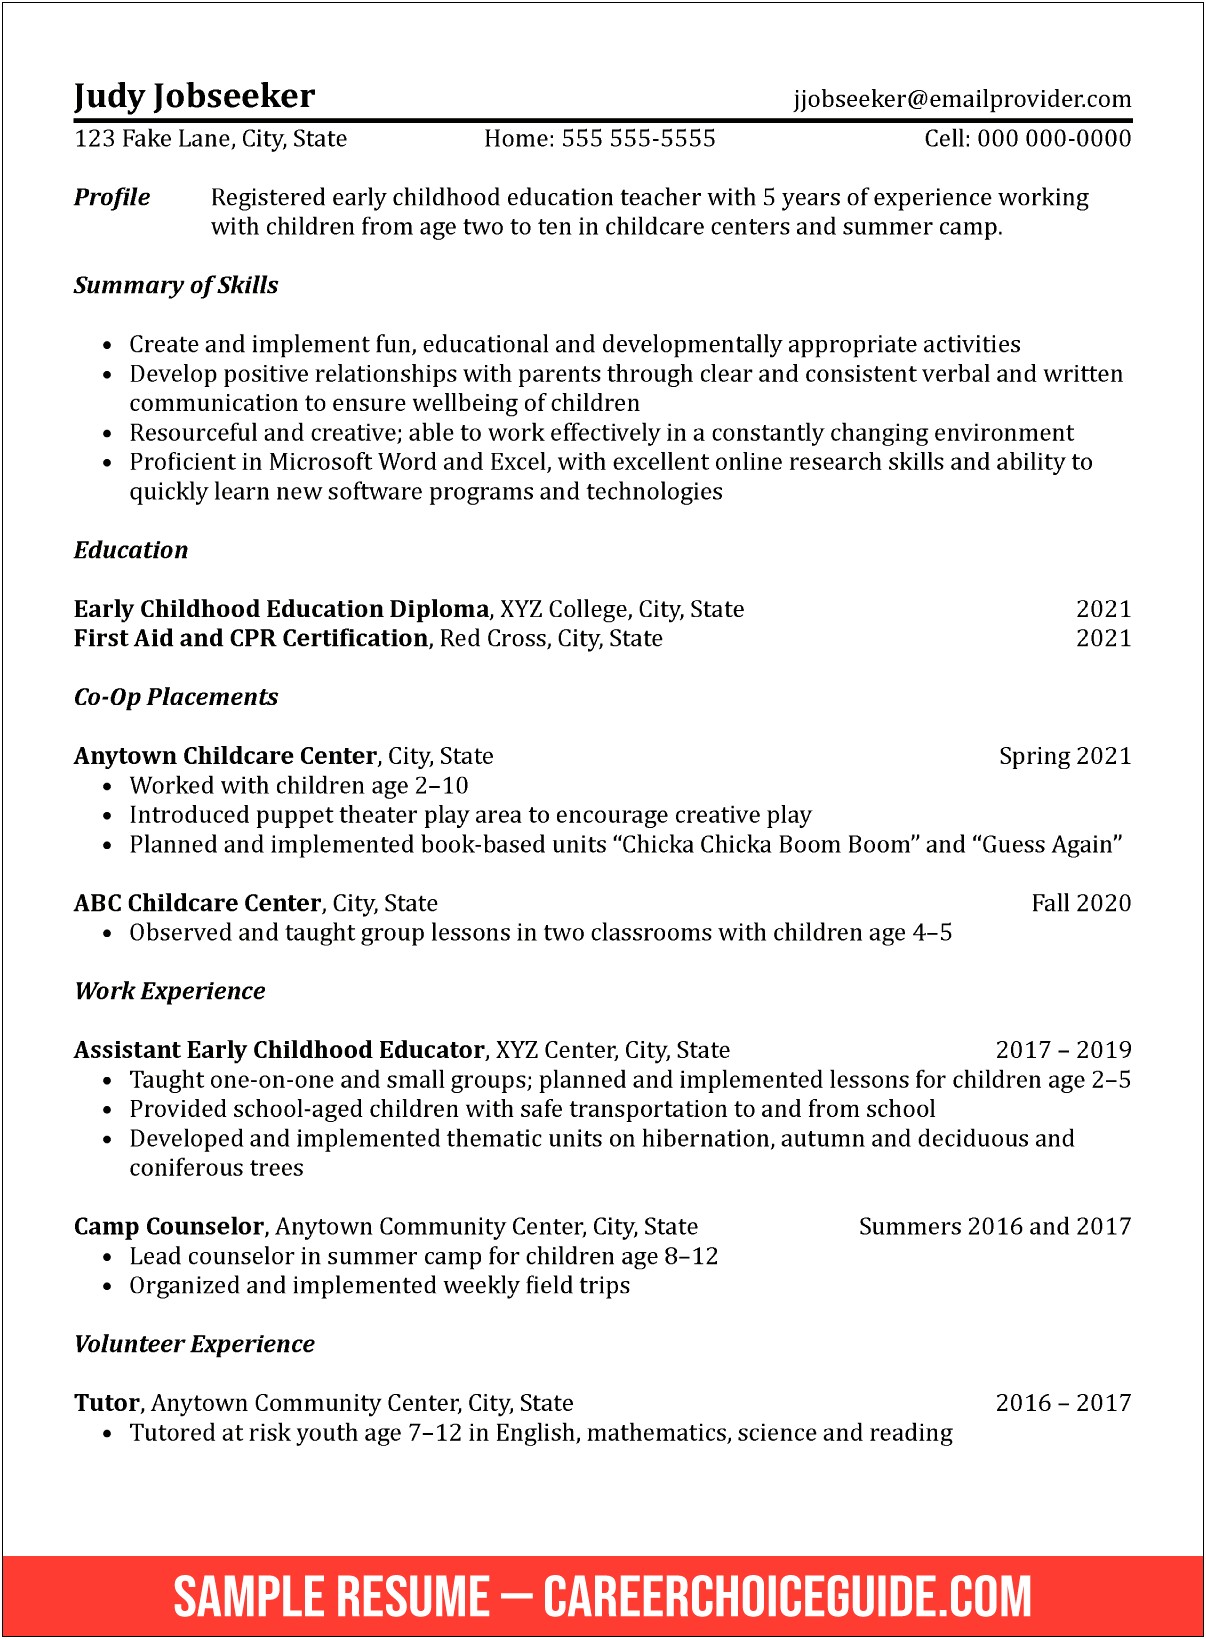 Recent Graduate With Little Experience Resume